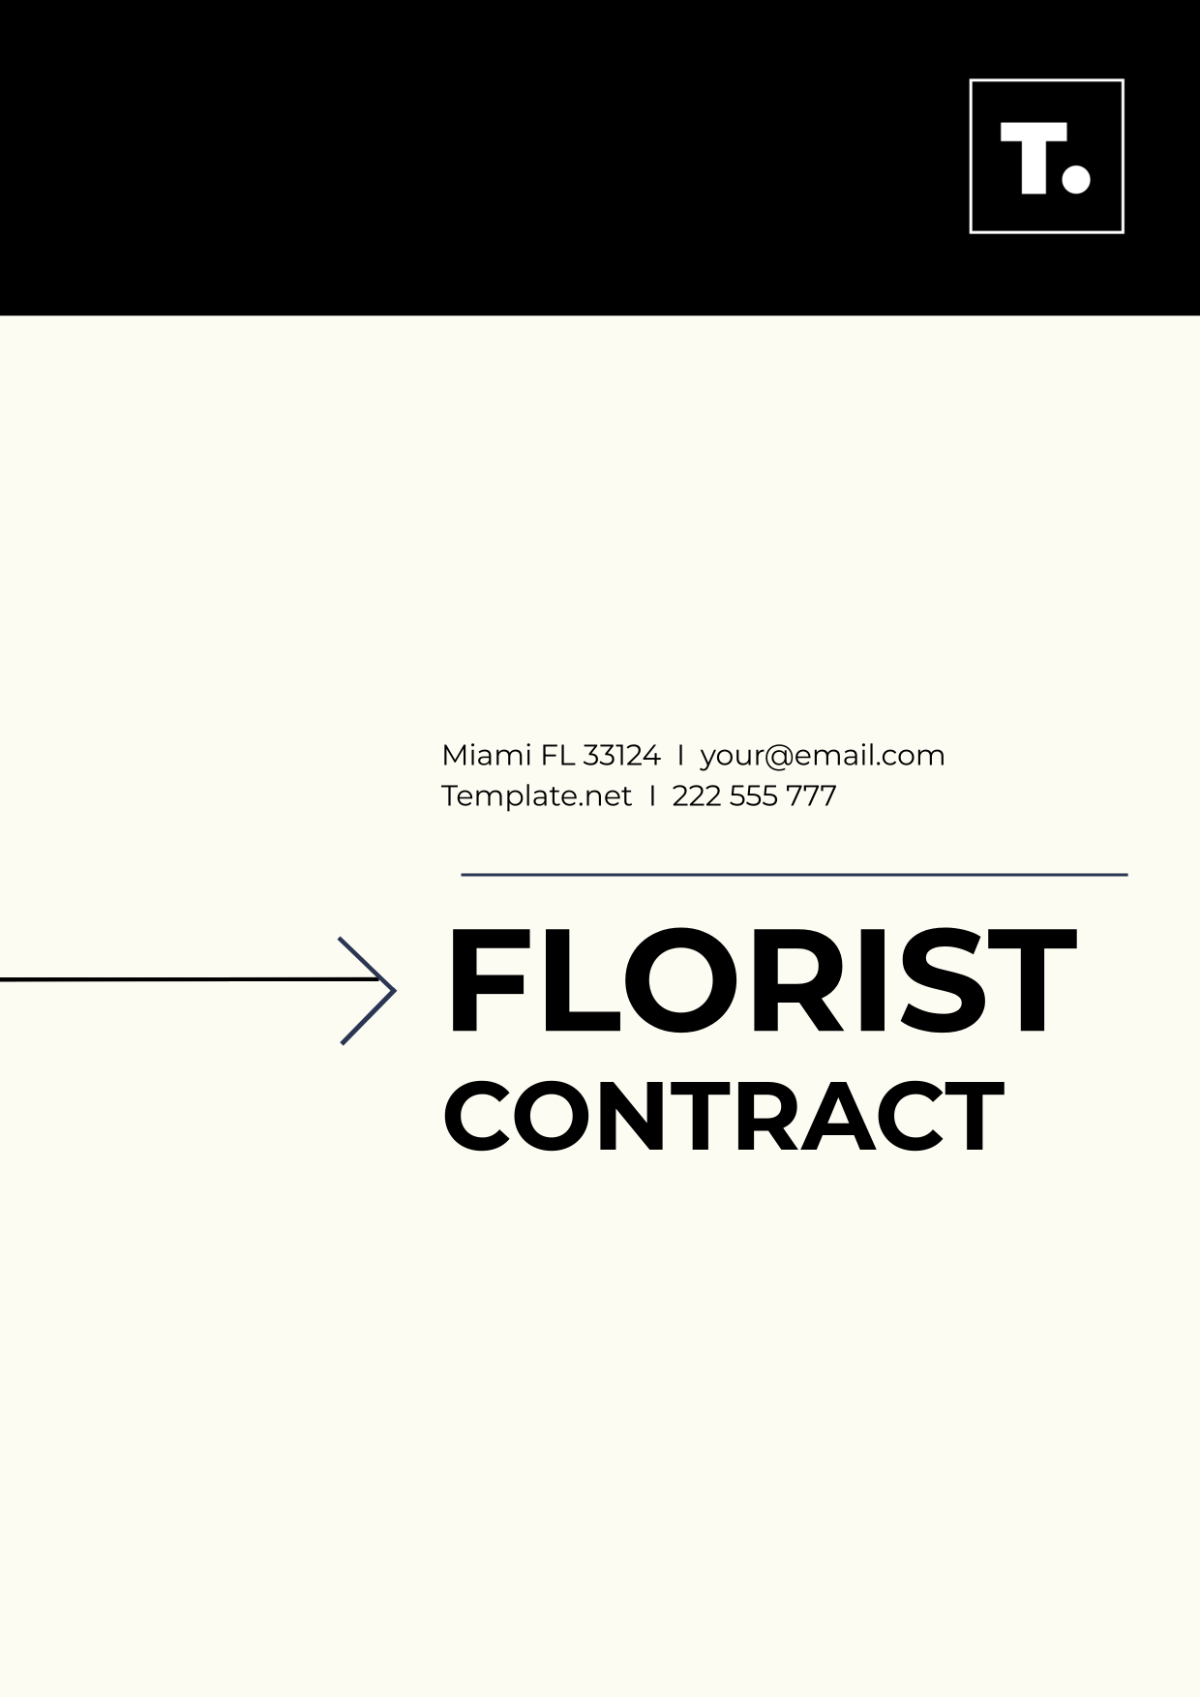 Free Florist Contract Template